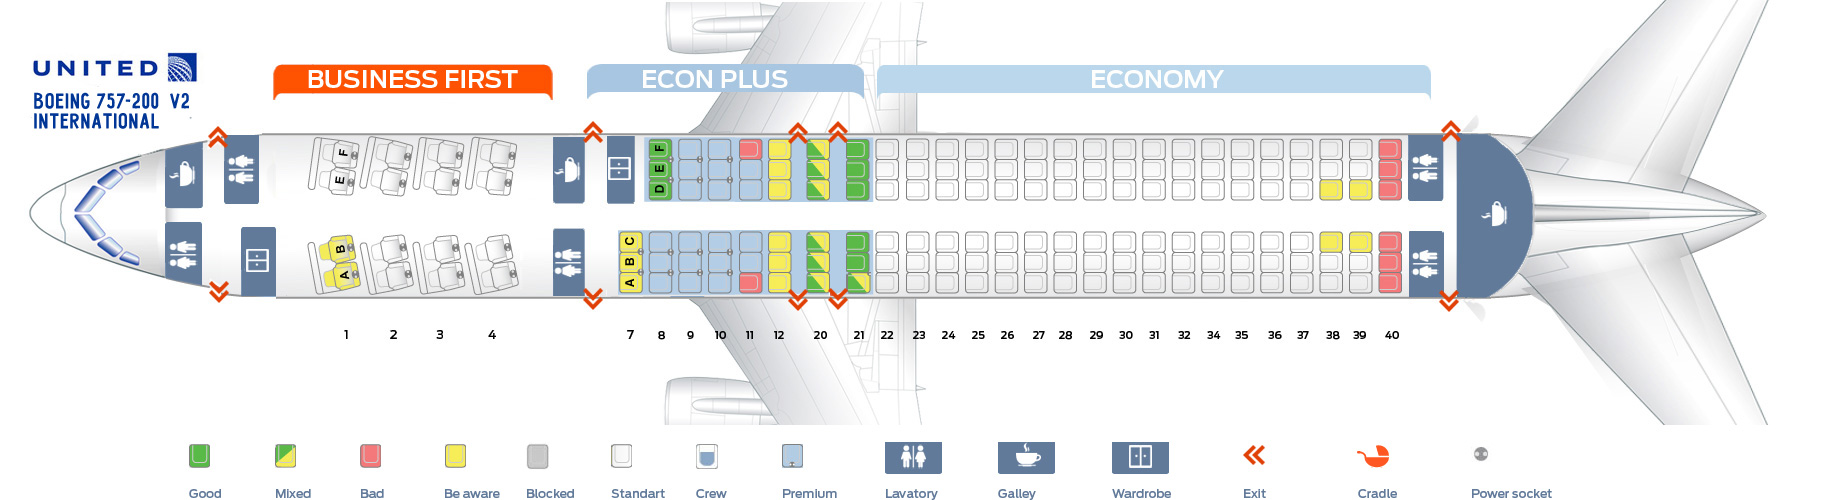 Seat map Boeing 757200 United Airlines. Best seats in plane